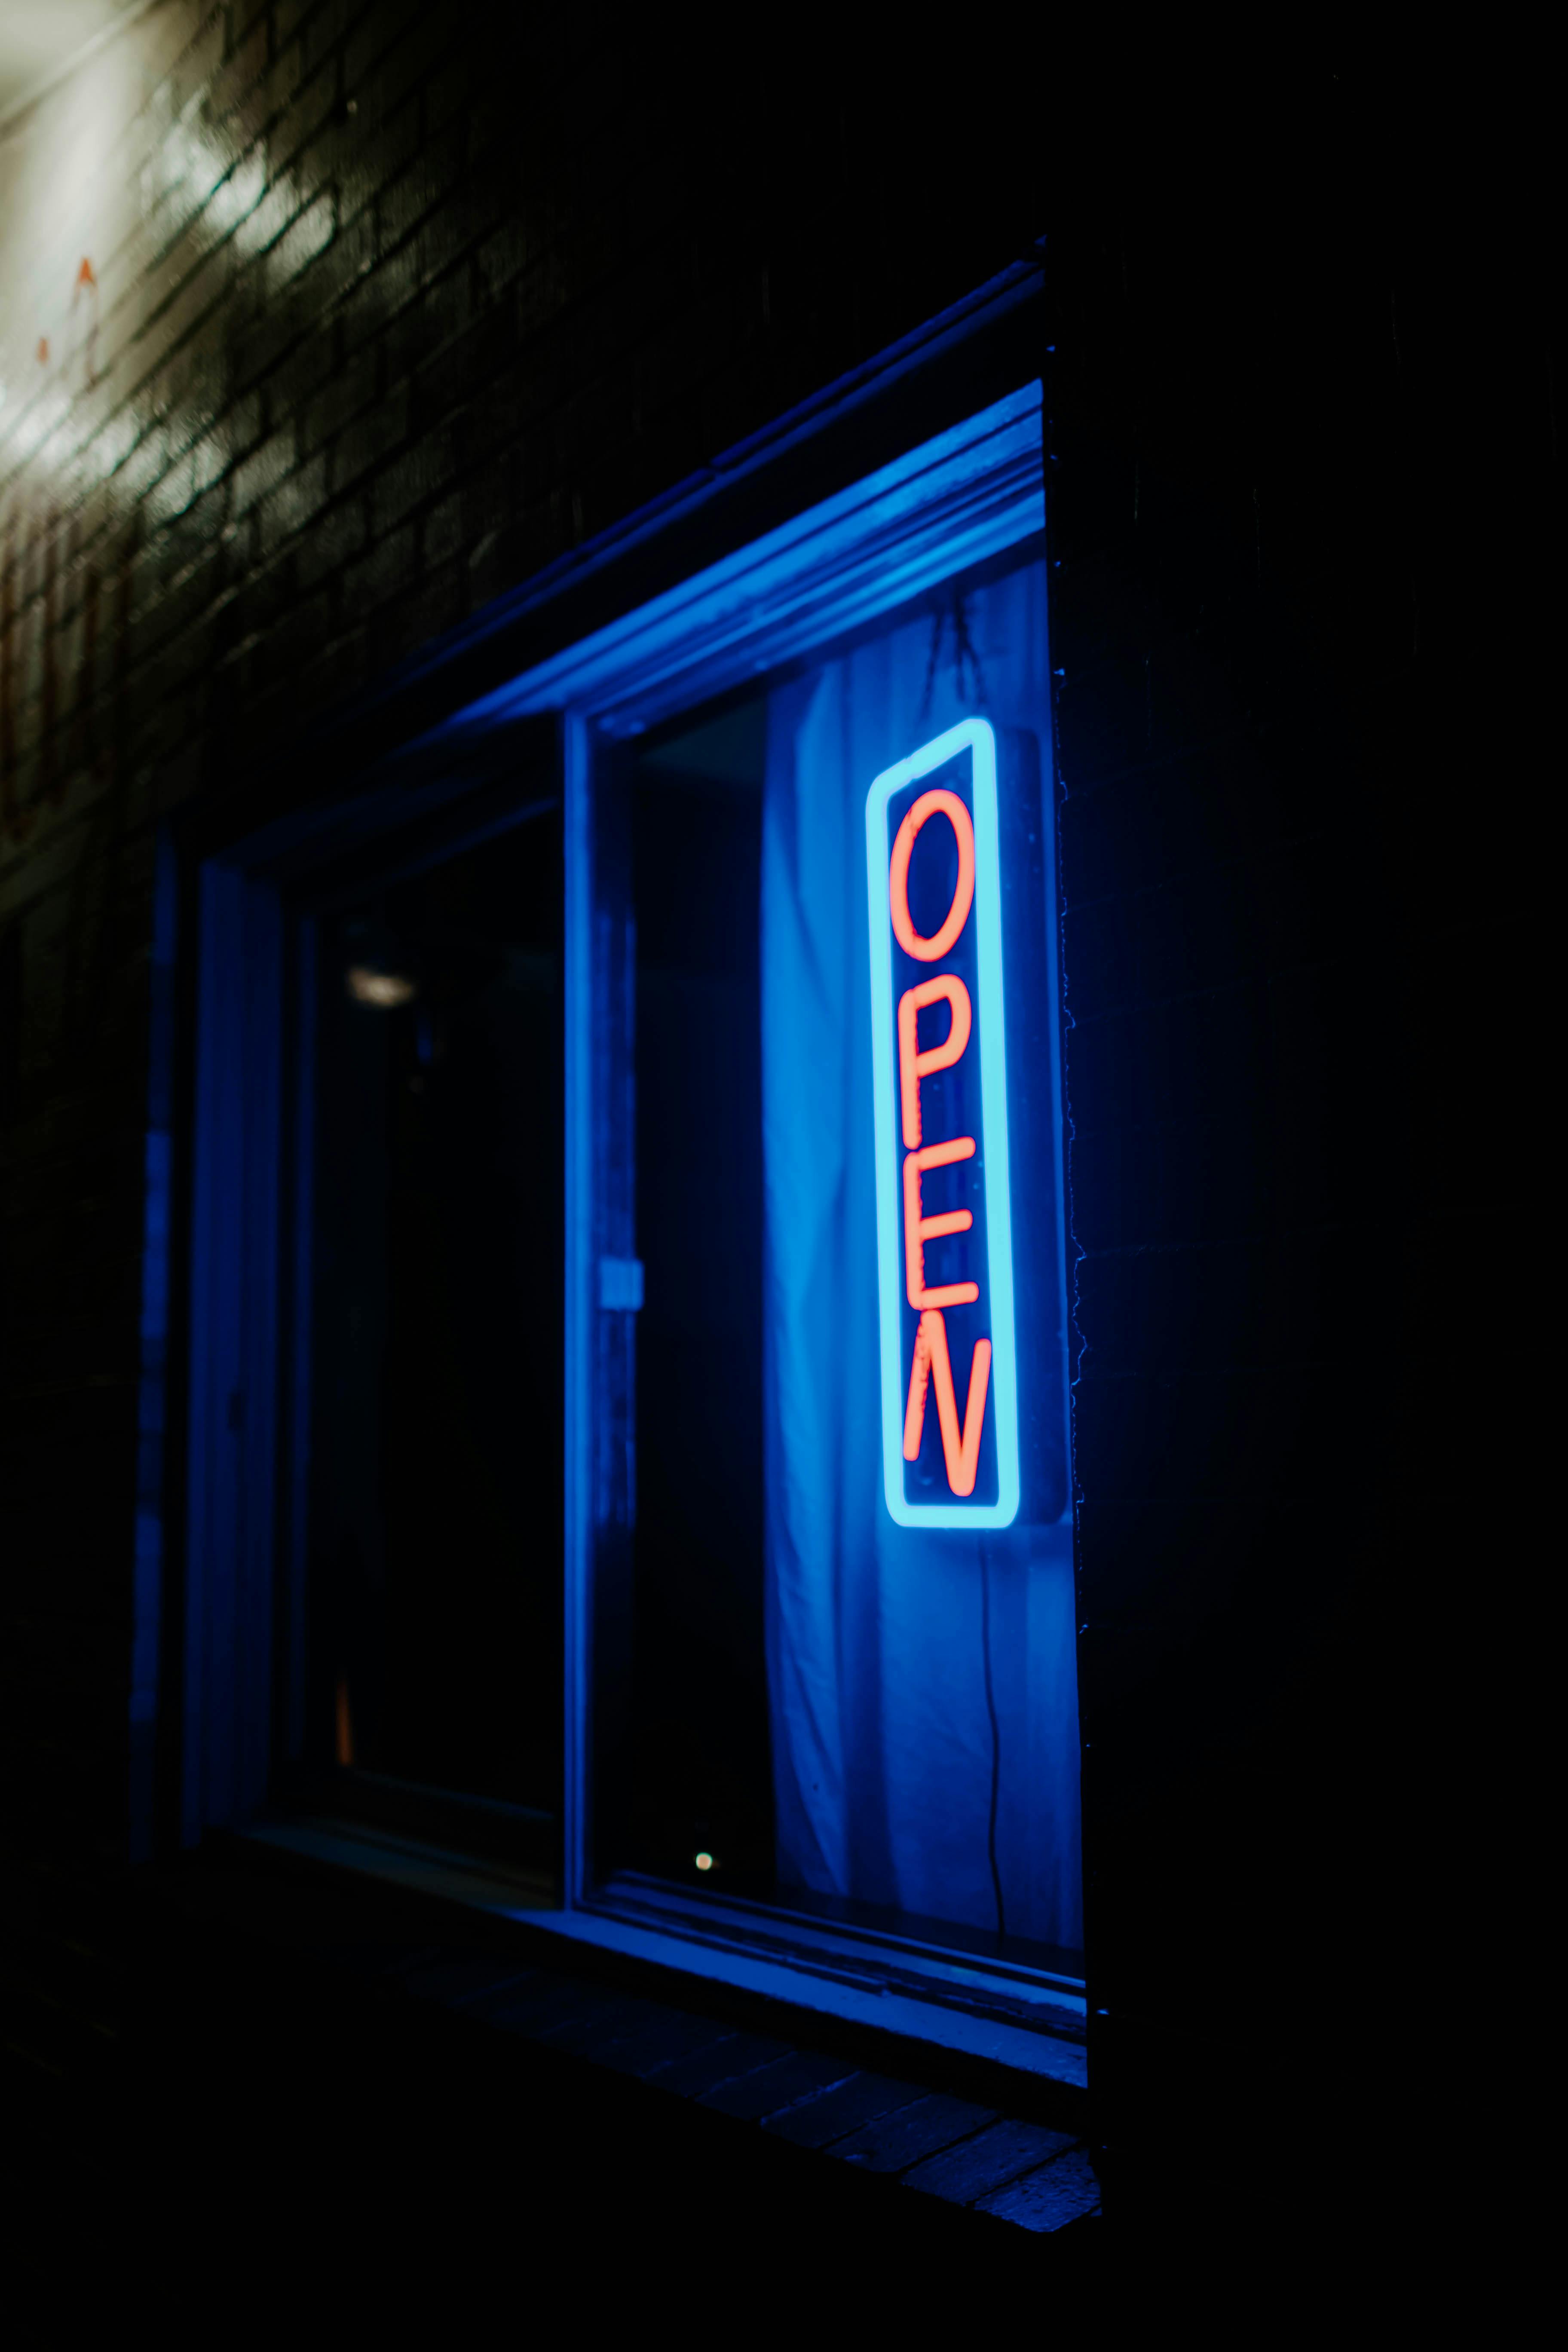 Blue and Redd Open Neon Signage · Free Stock Photo